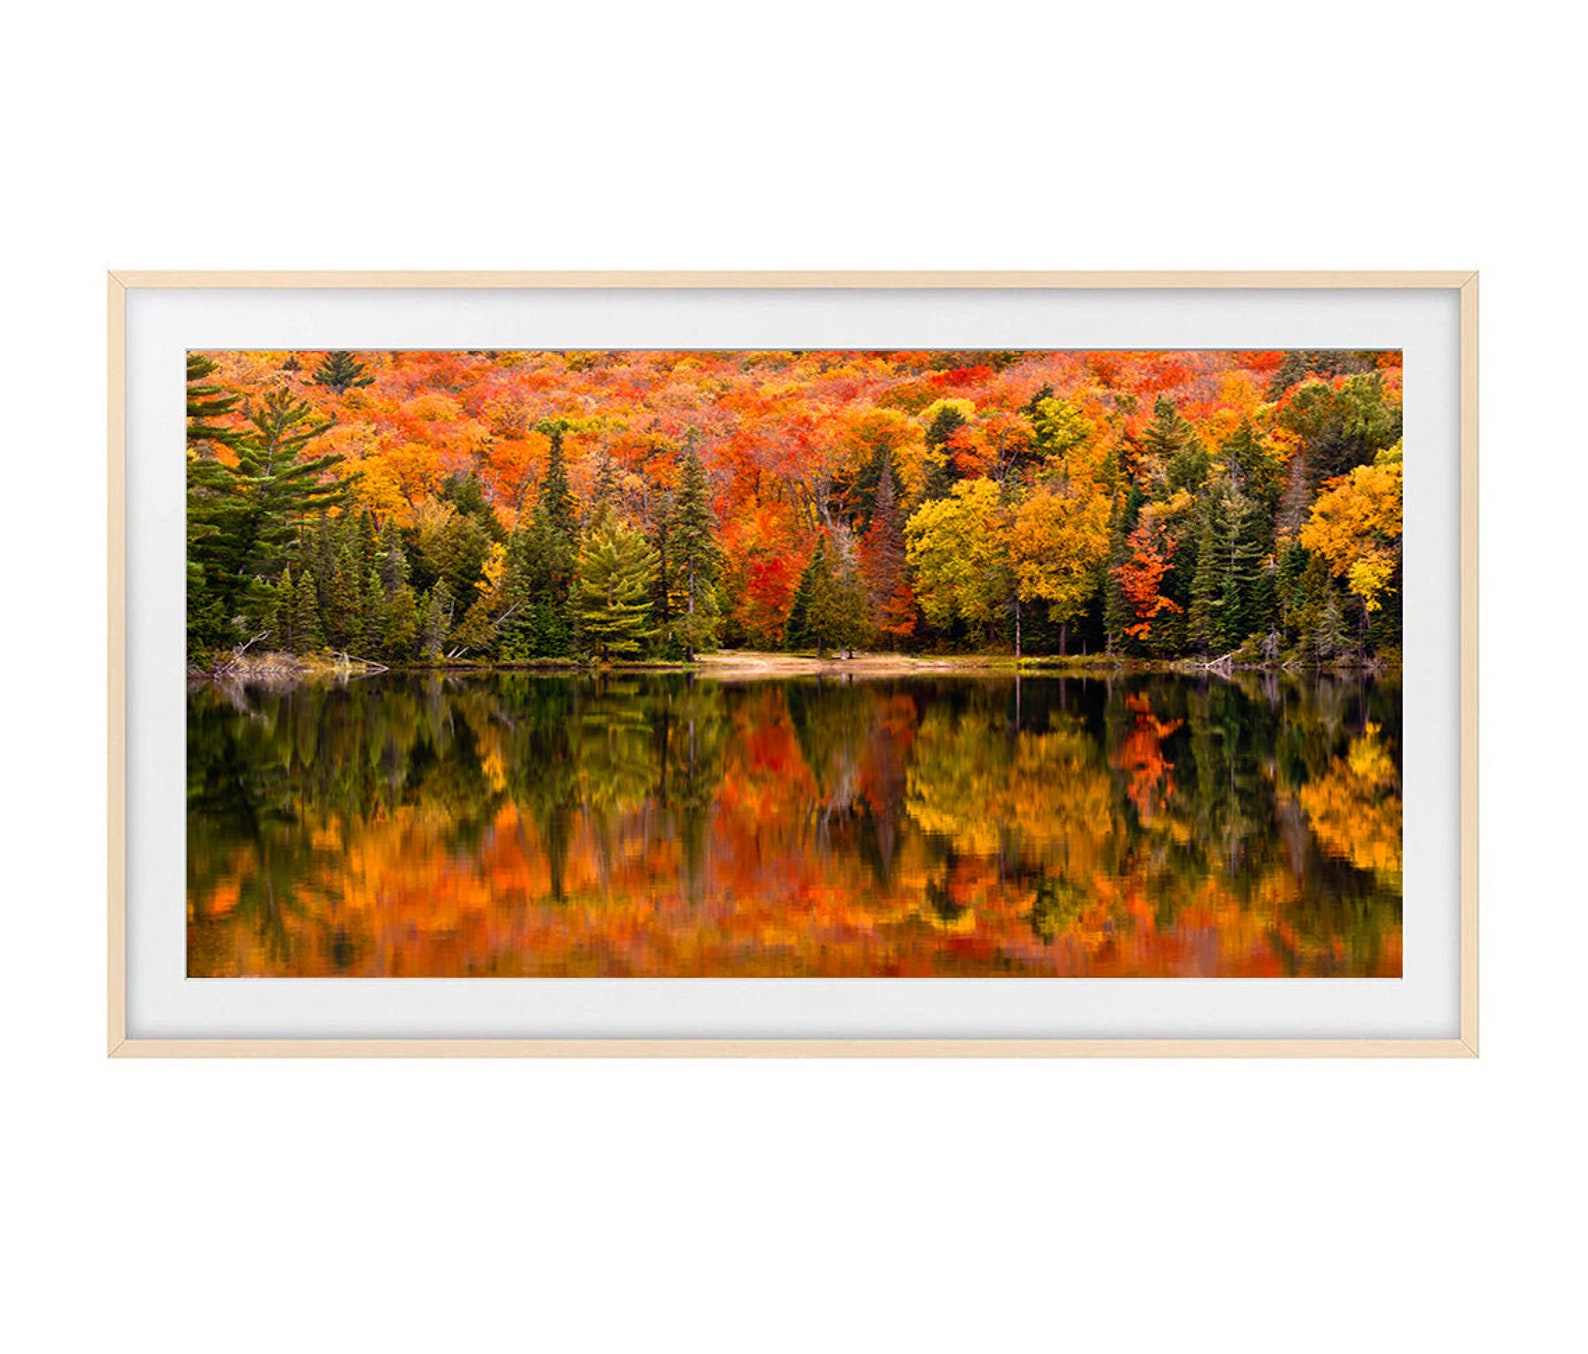 Frame TV Art Autumn Picturesque Fall Foliage & Reflection - Etsy